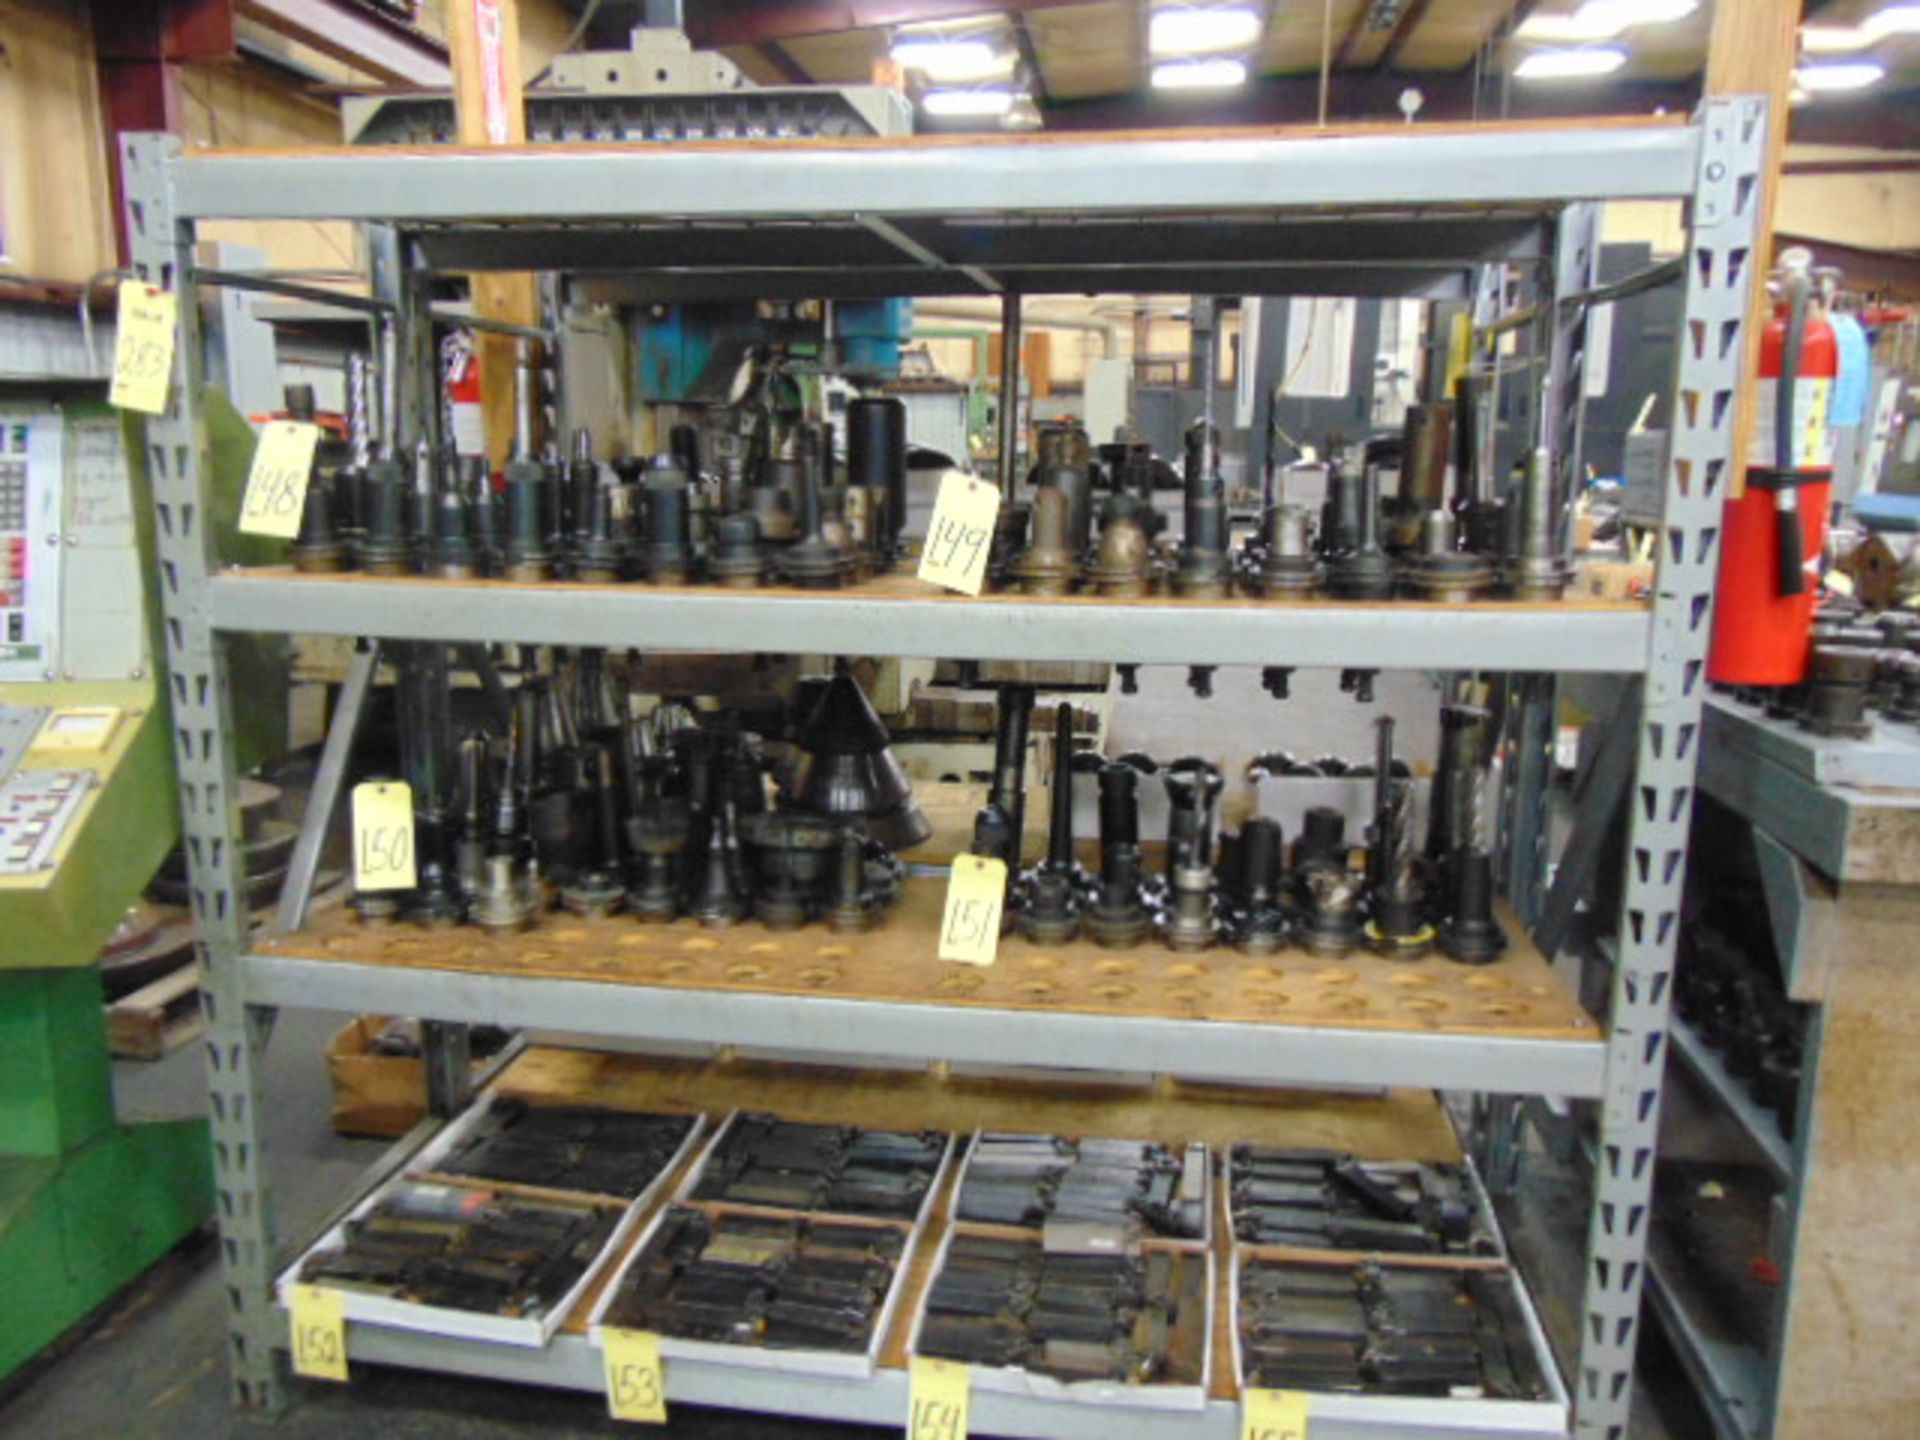 ADJUSTABLE STEEL RACKS (4), 72"ht. x 72"W. x 24"dp. (Note: cannot be removed until empty) - Image 3 of 4